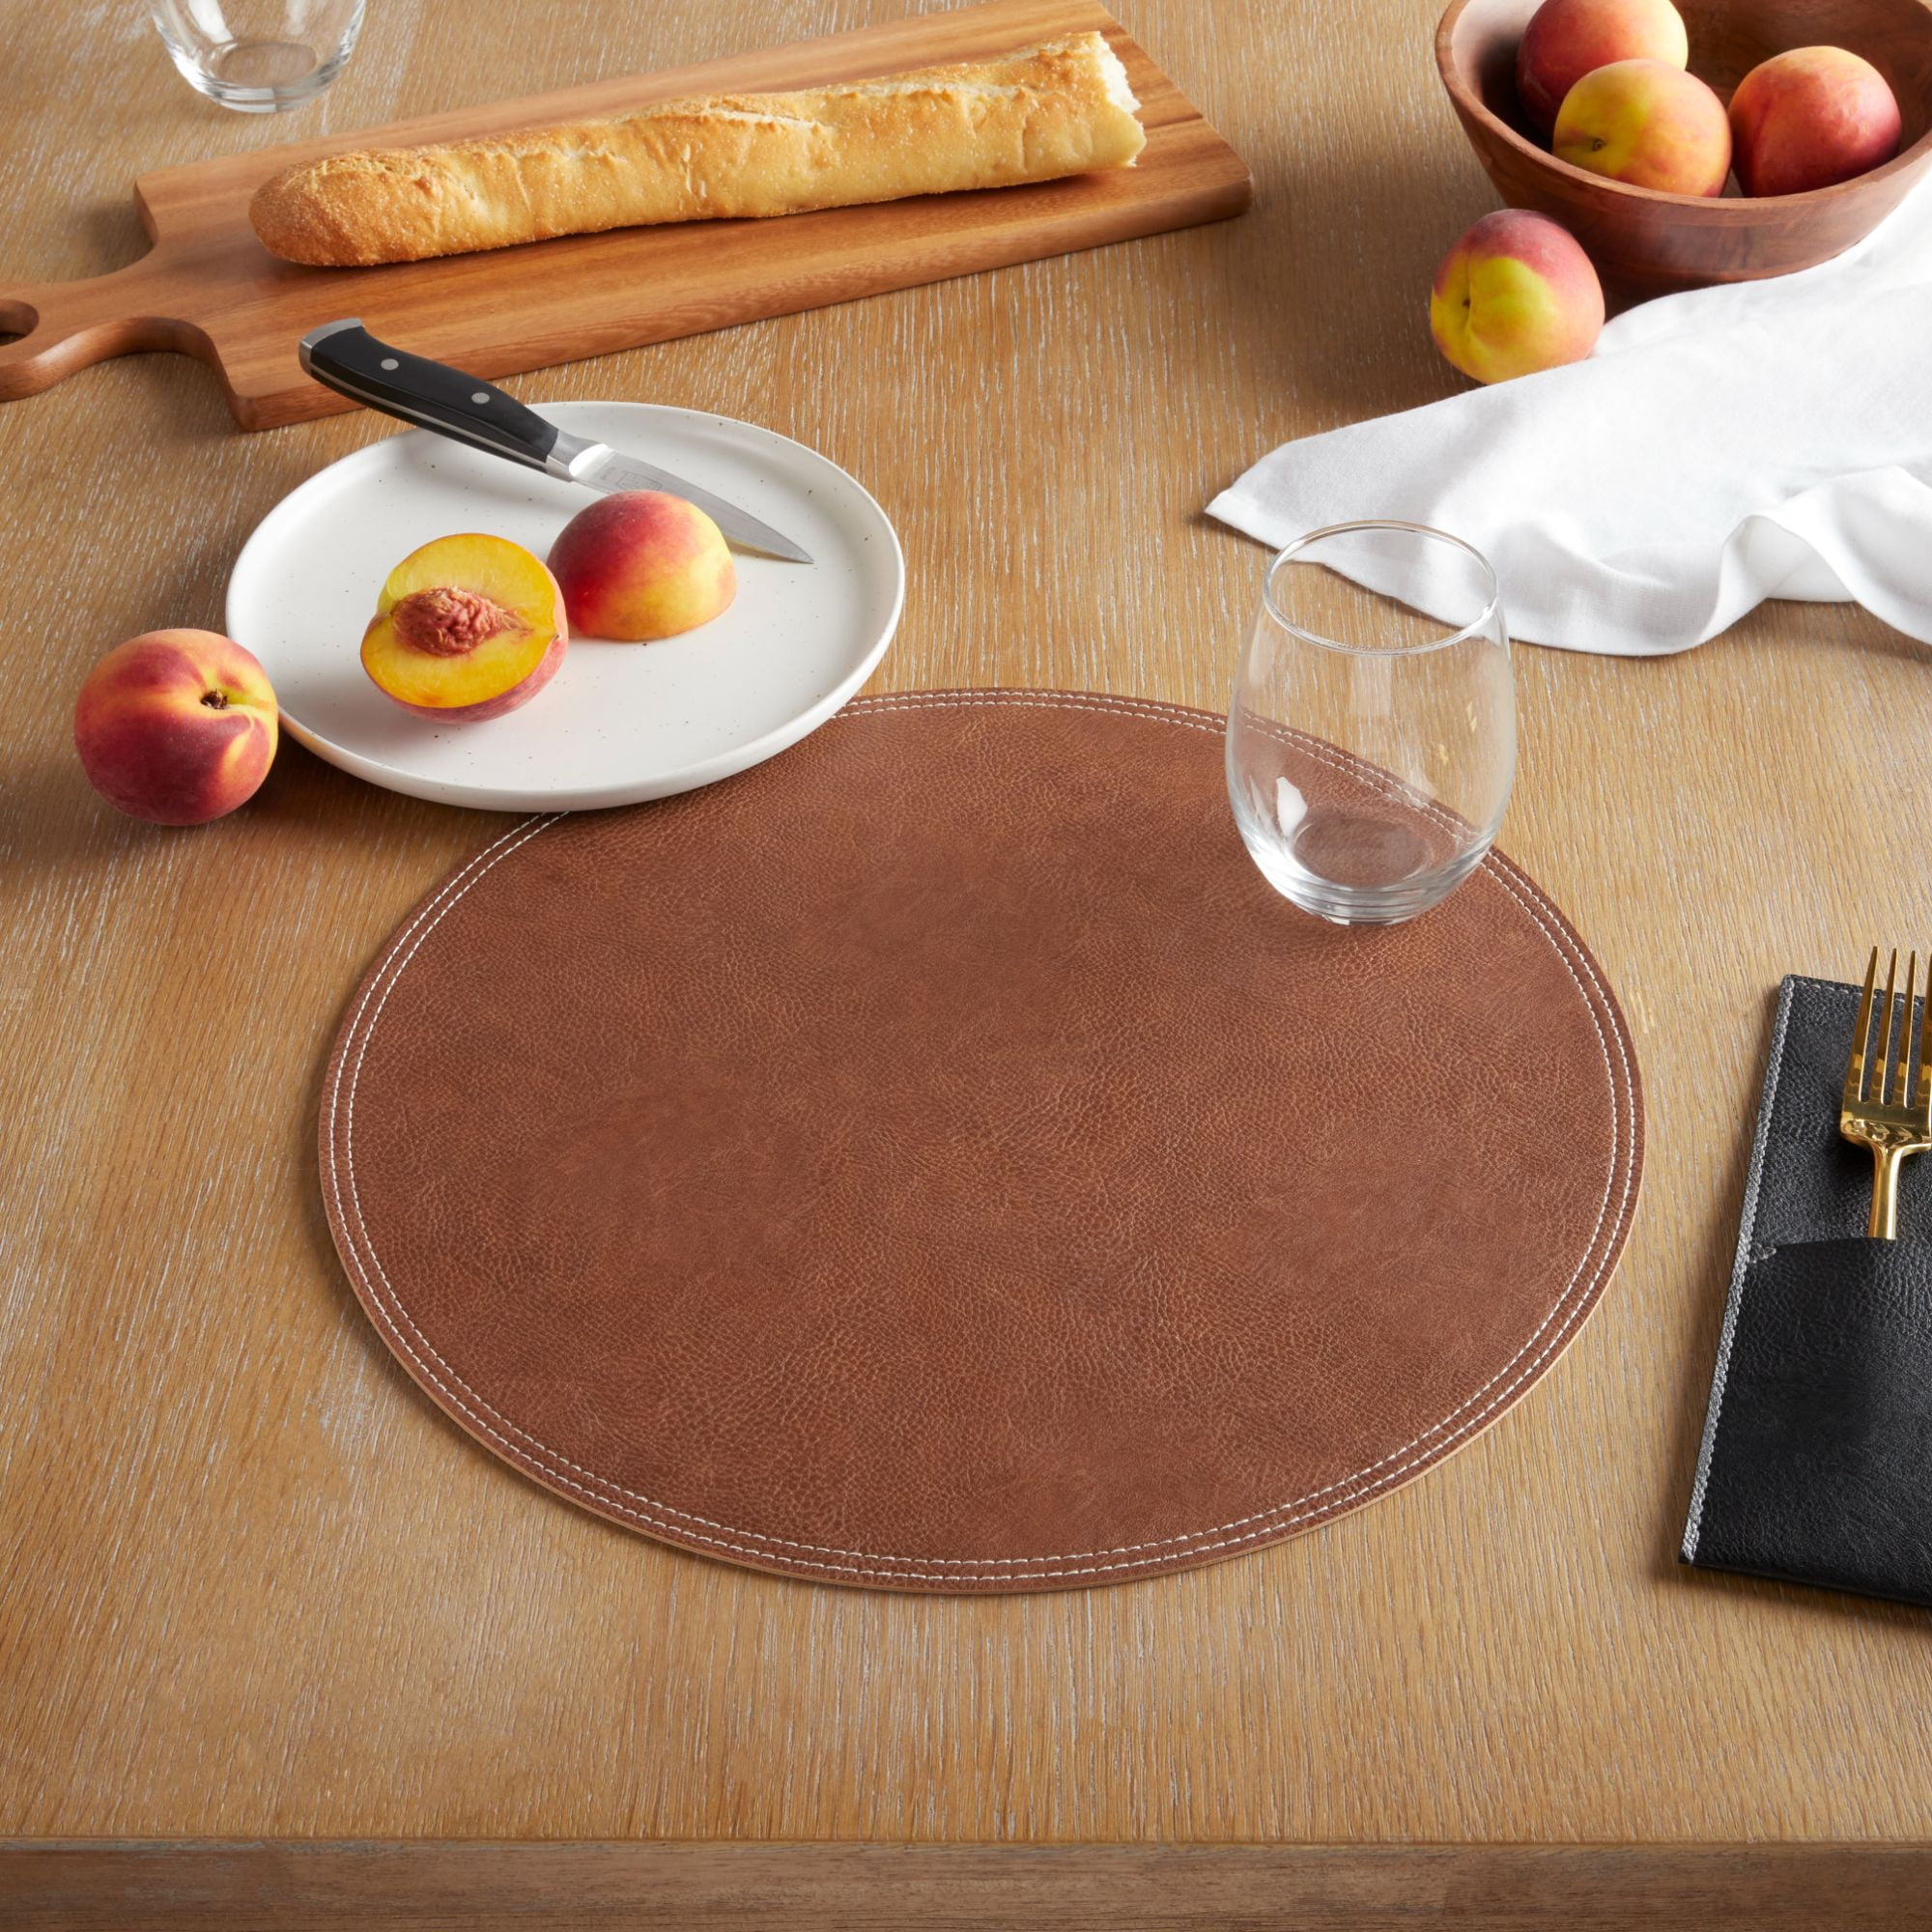 Crestone Leather/Faux Leather Round Placemat